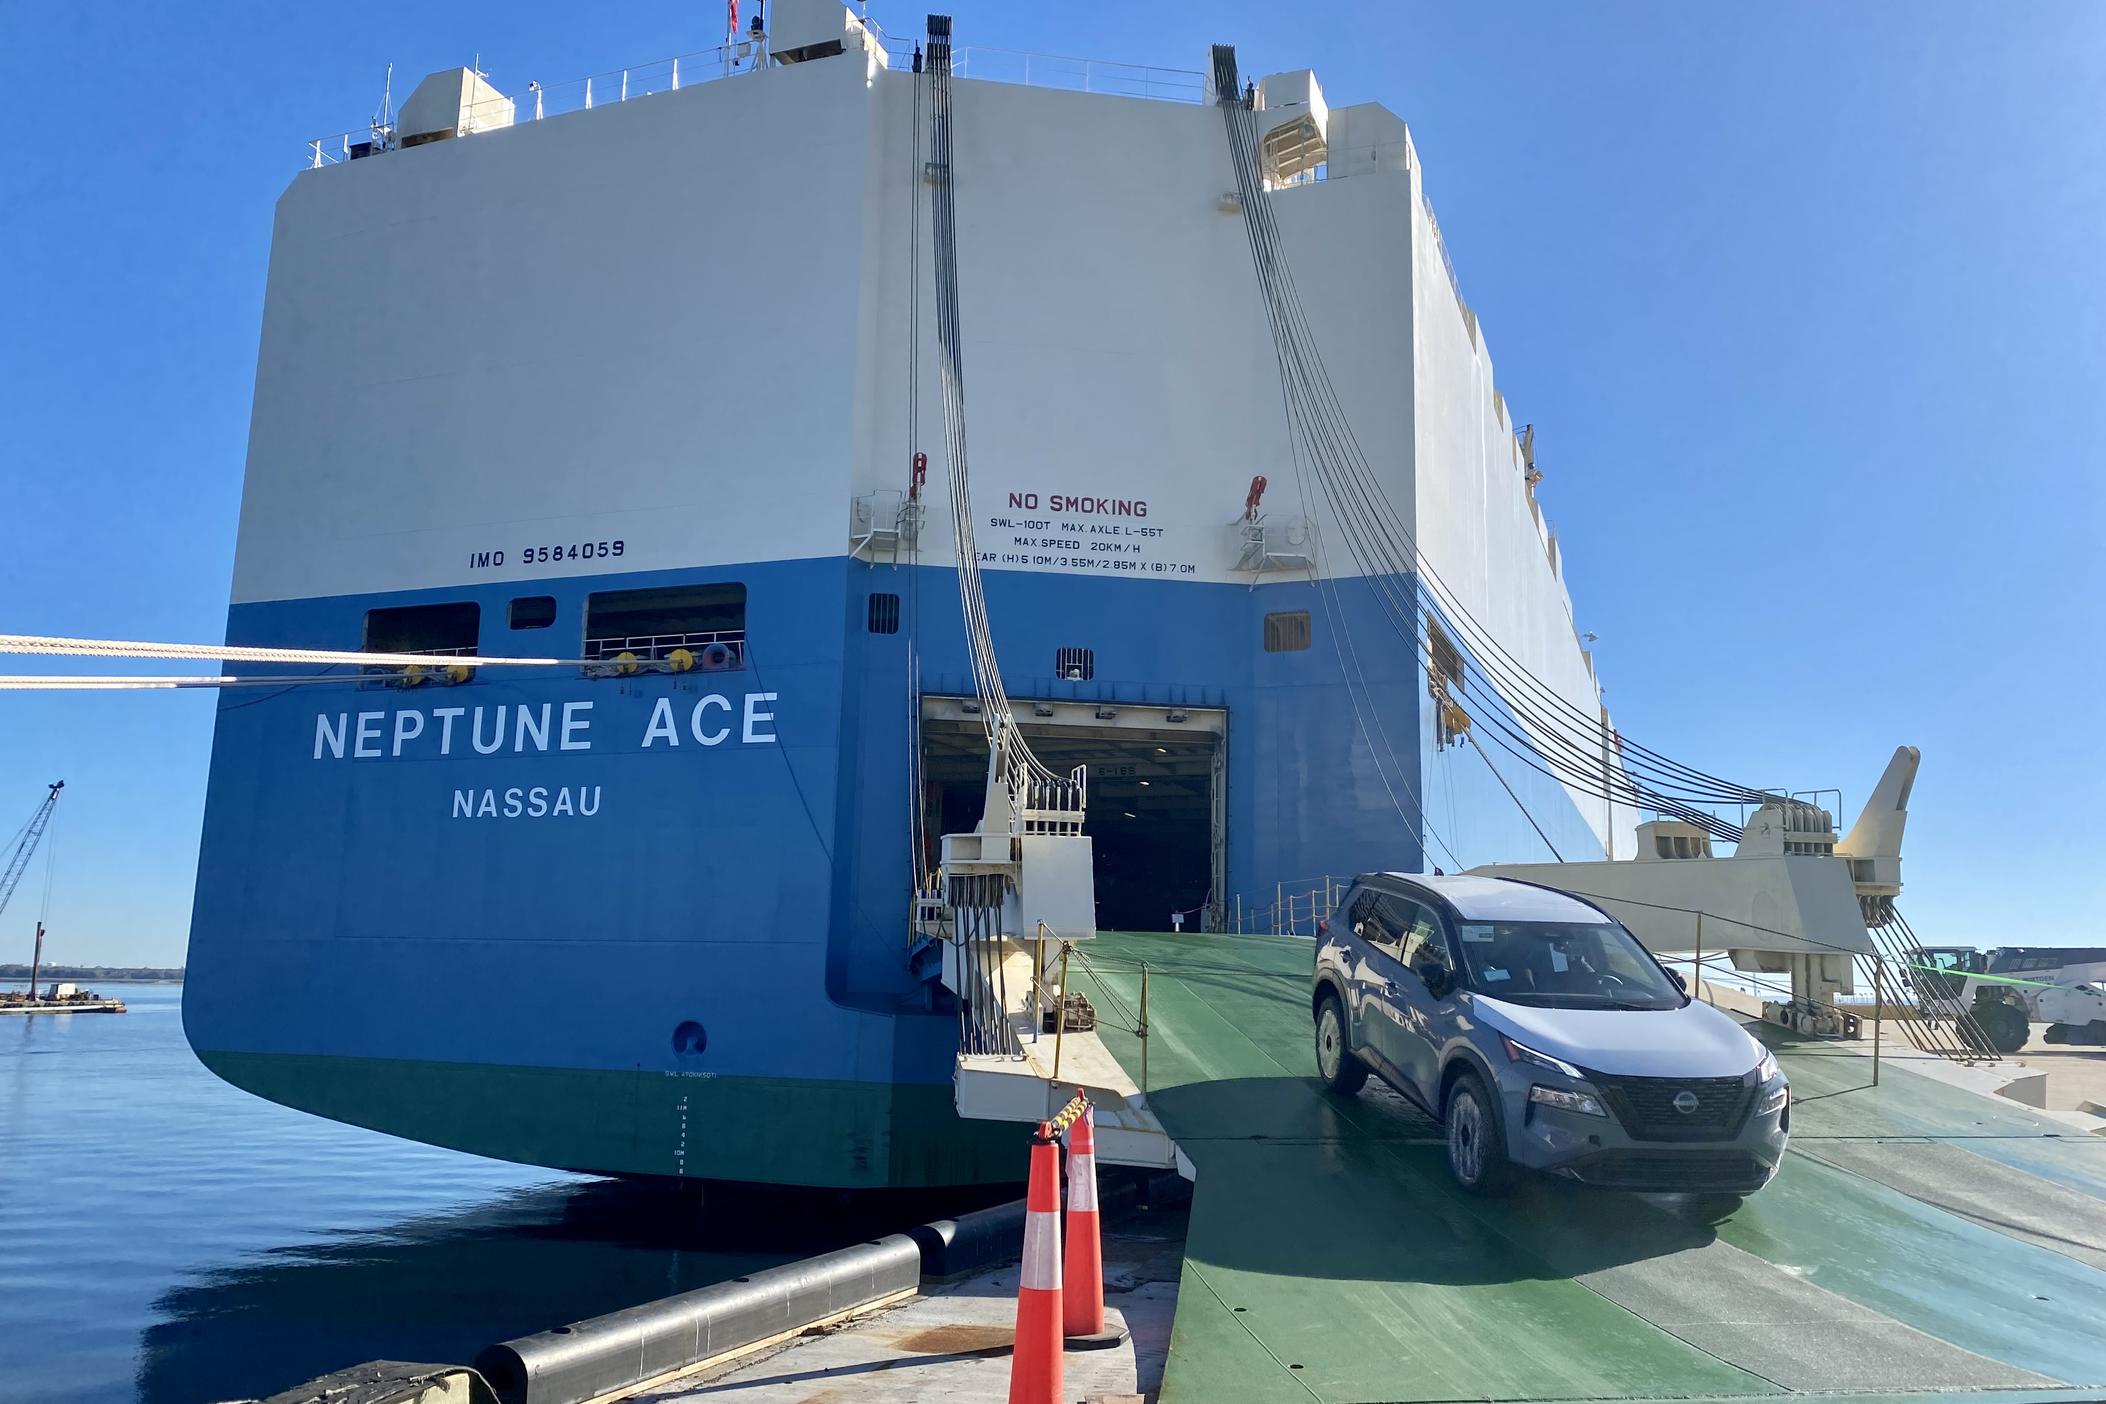 A Nissan Rogue exits the bay of the vehicle carrier Neptune Ace at the Port of Brunswick in Georgia.